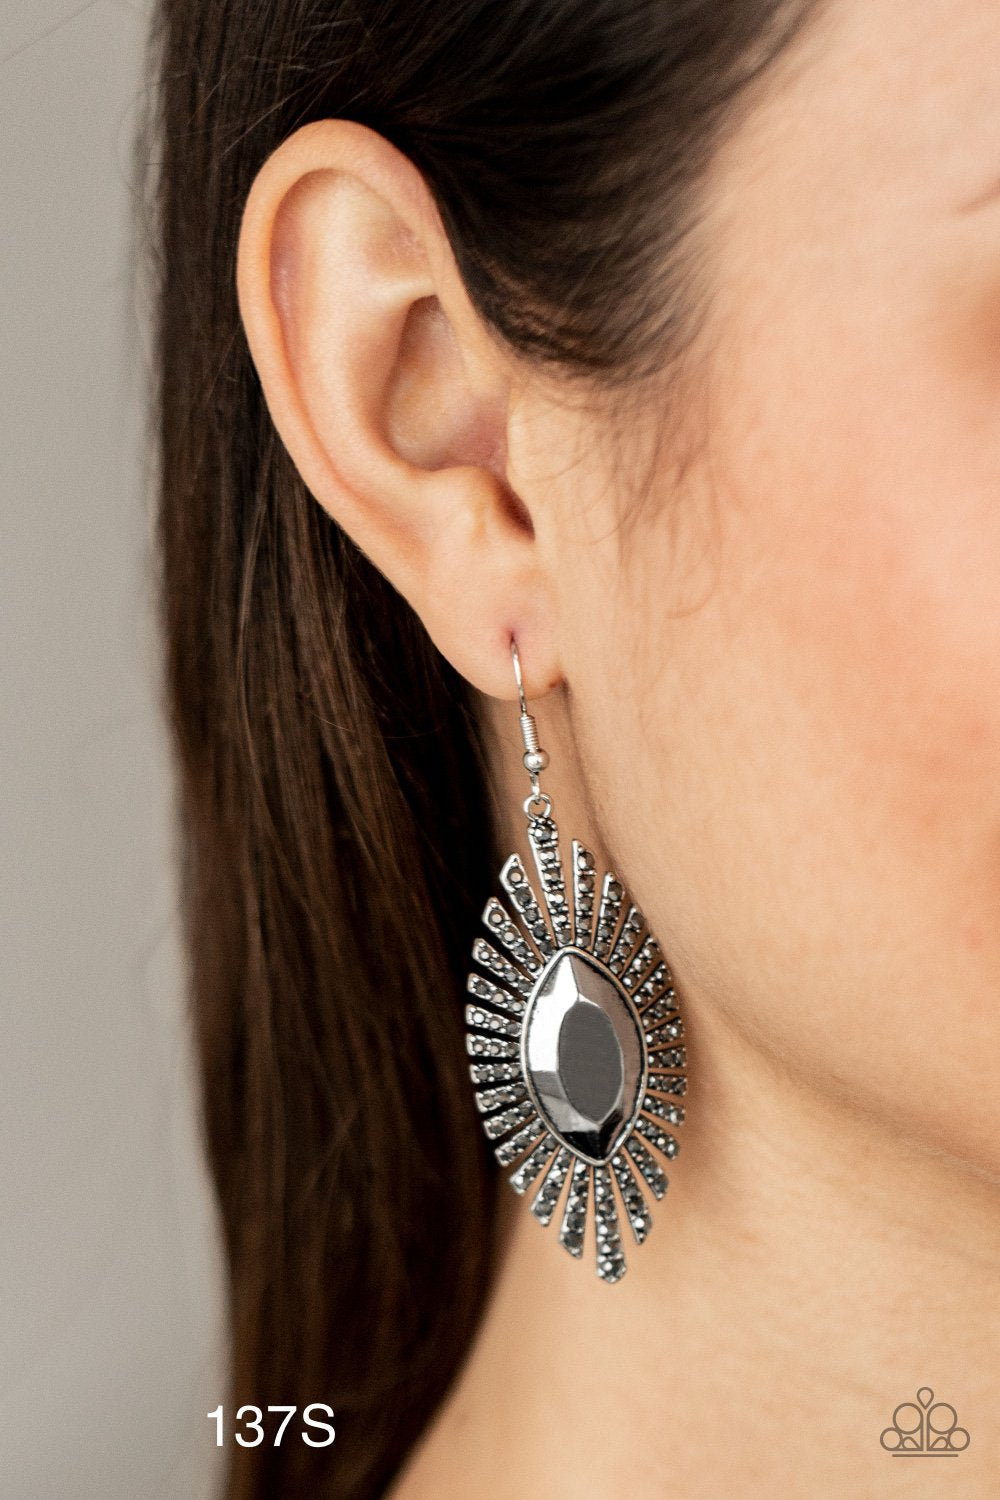 Paparazzi “Who Is The FIERCEST Of Them All” Silver Dangle Earrings